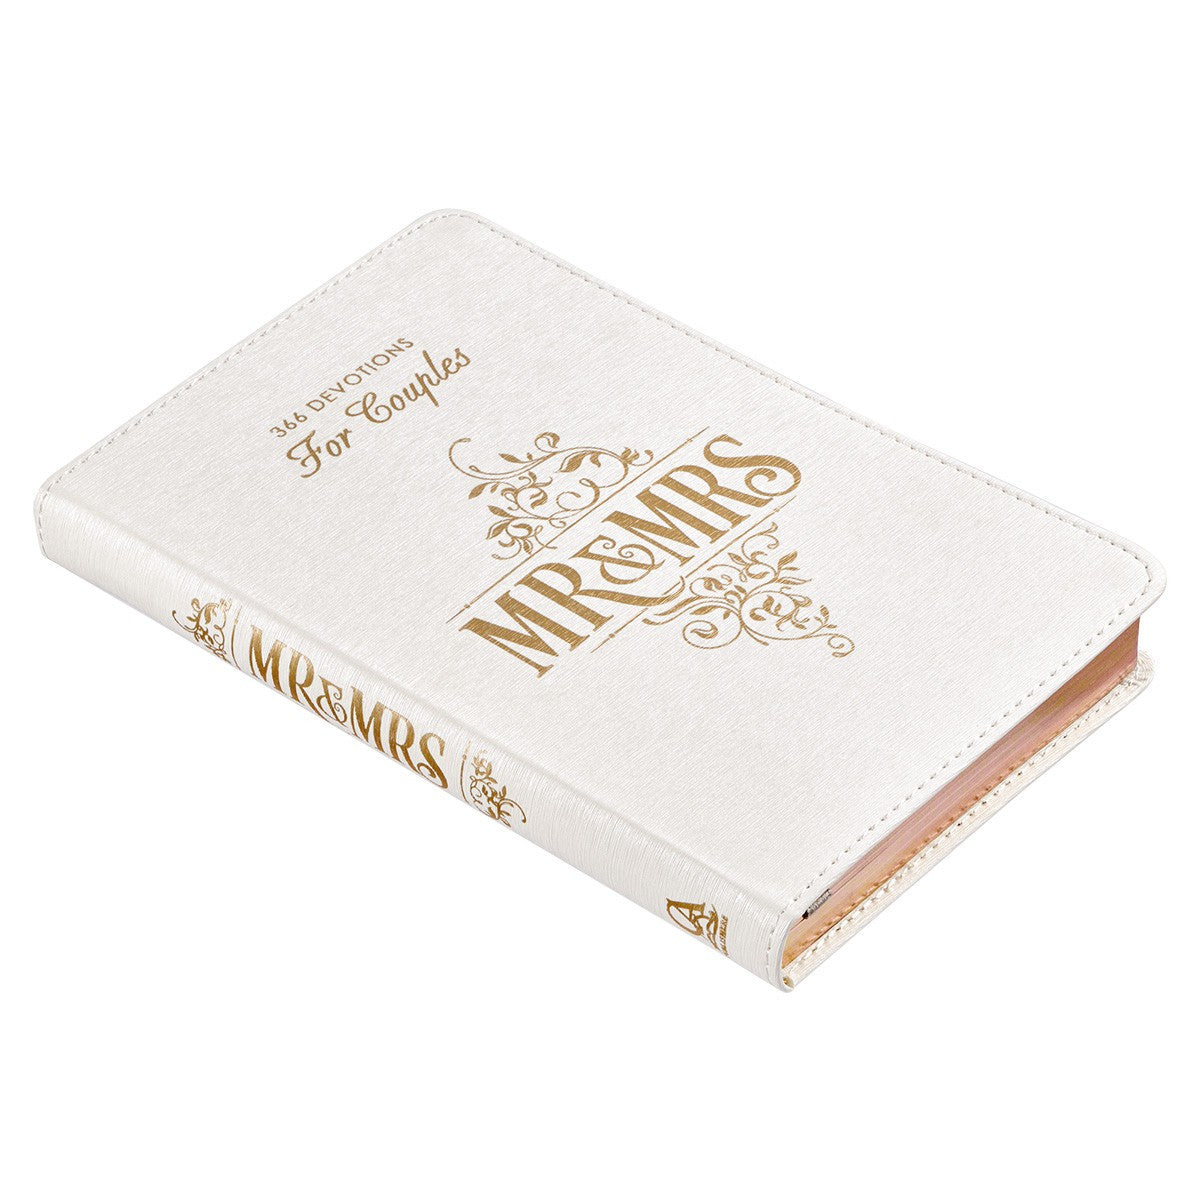 Mr. & Mrs. 366 Devotions for Couples White Faux Leather Devotional - The Christian Gift Company